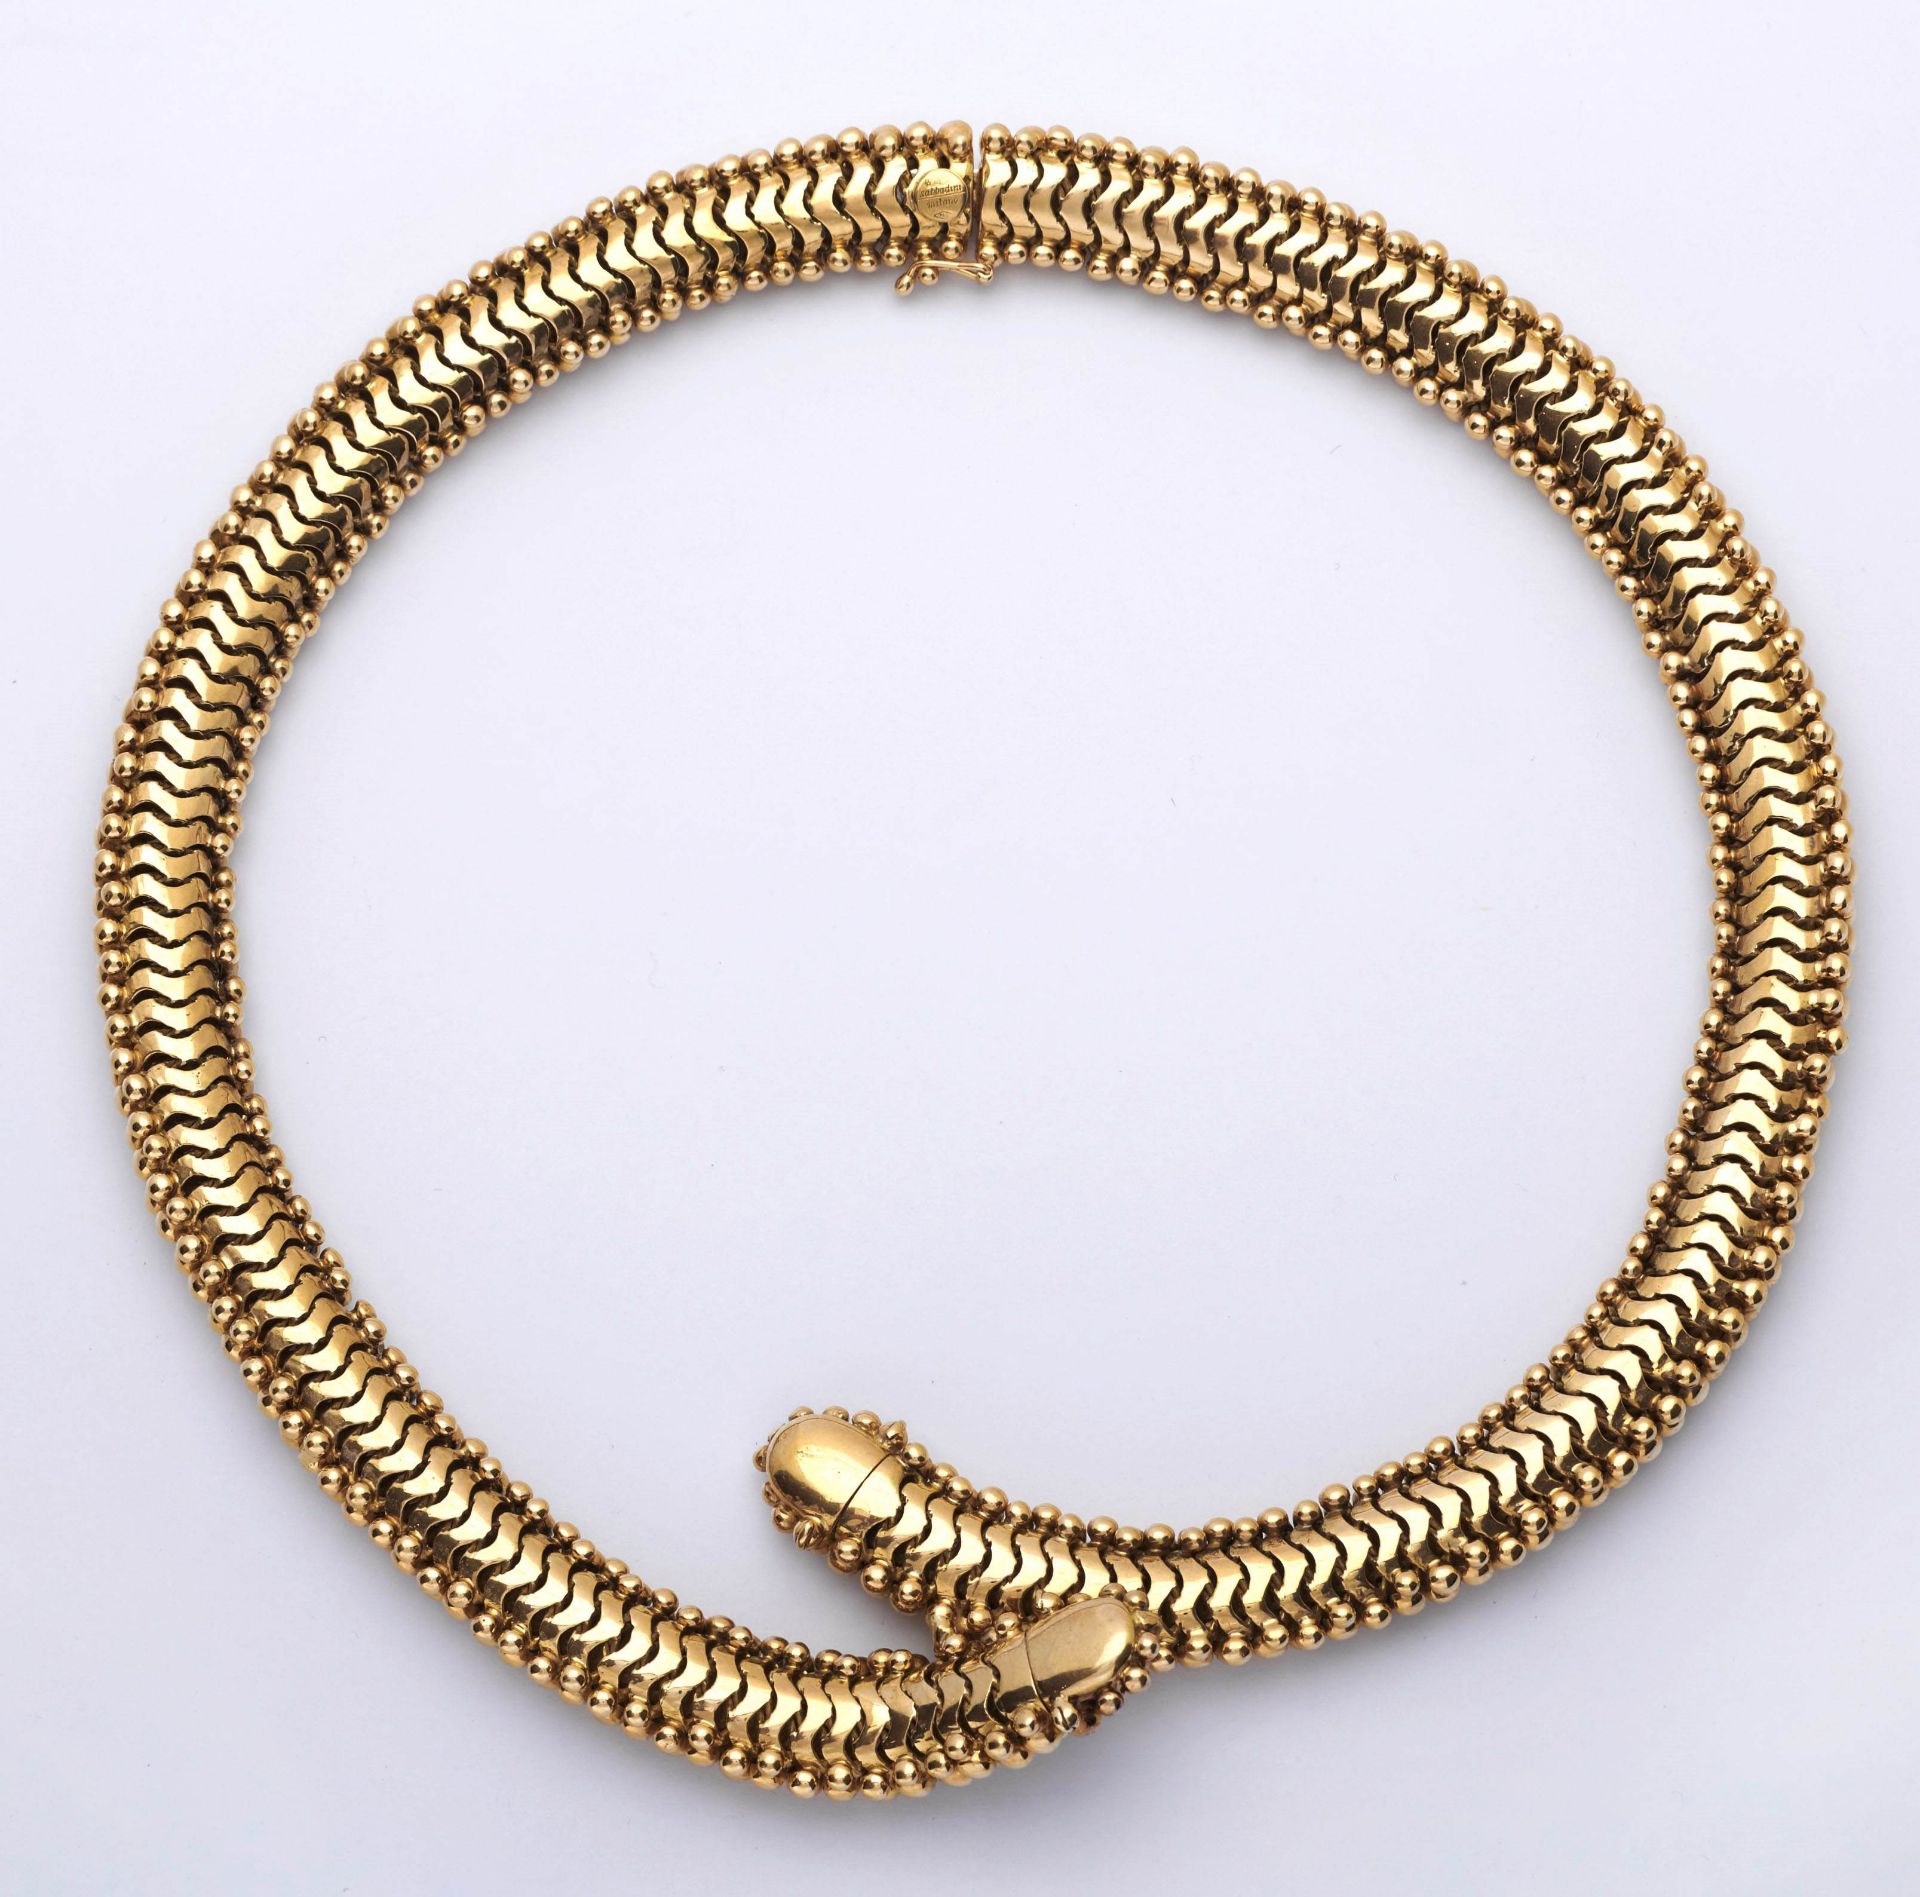 GOLD NECKLACE, BY SABBADINI. - Image 2 of 3